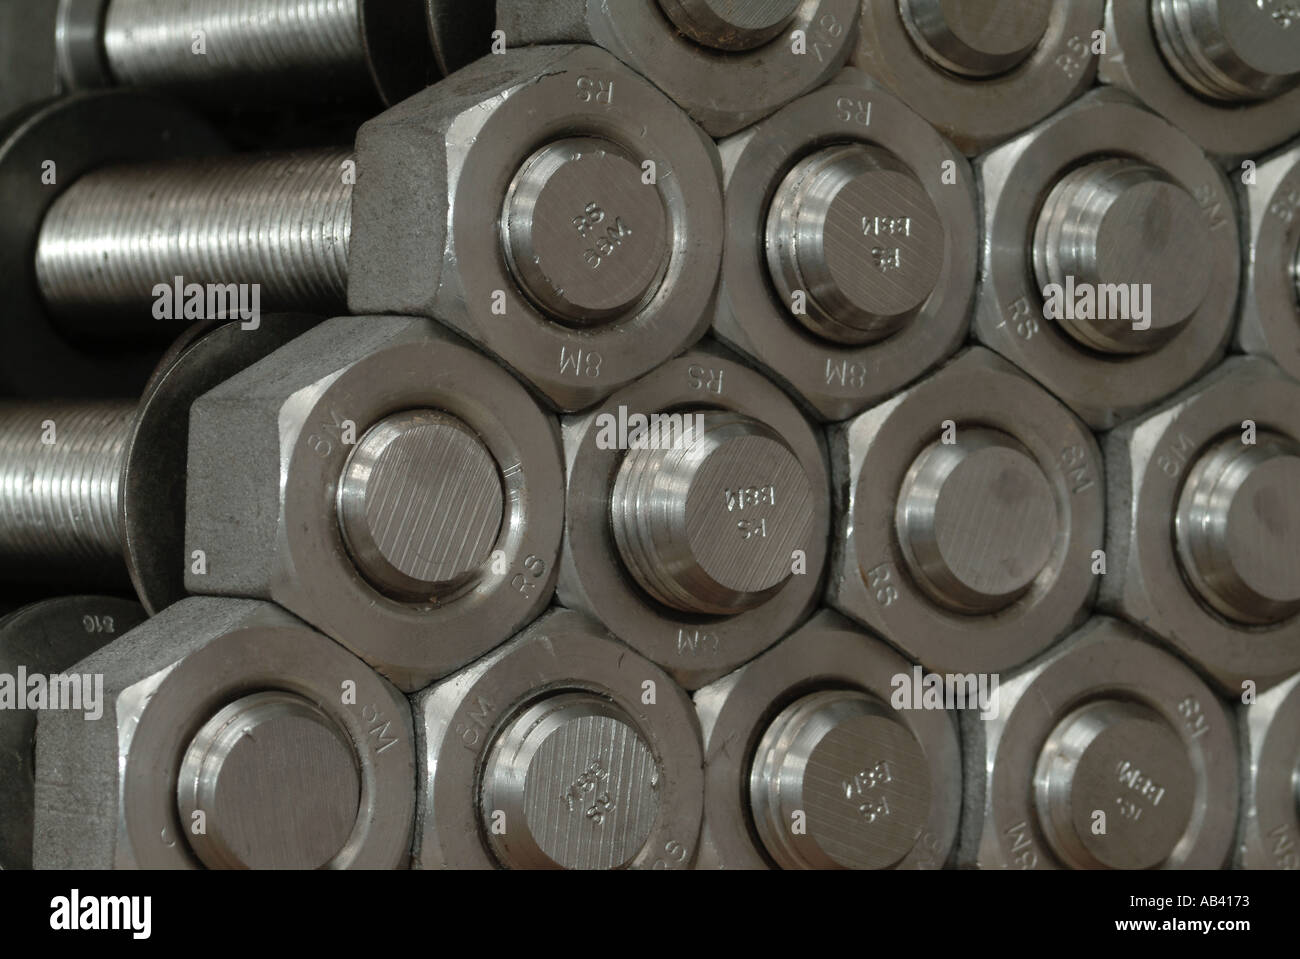 steel threaded nuts and bolts Stock Photo